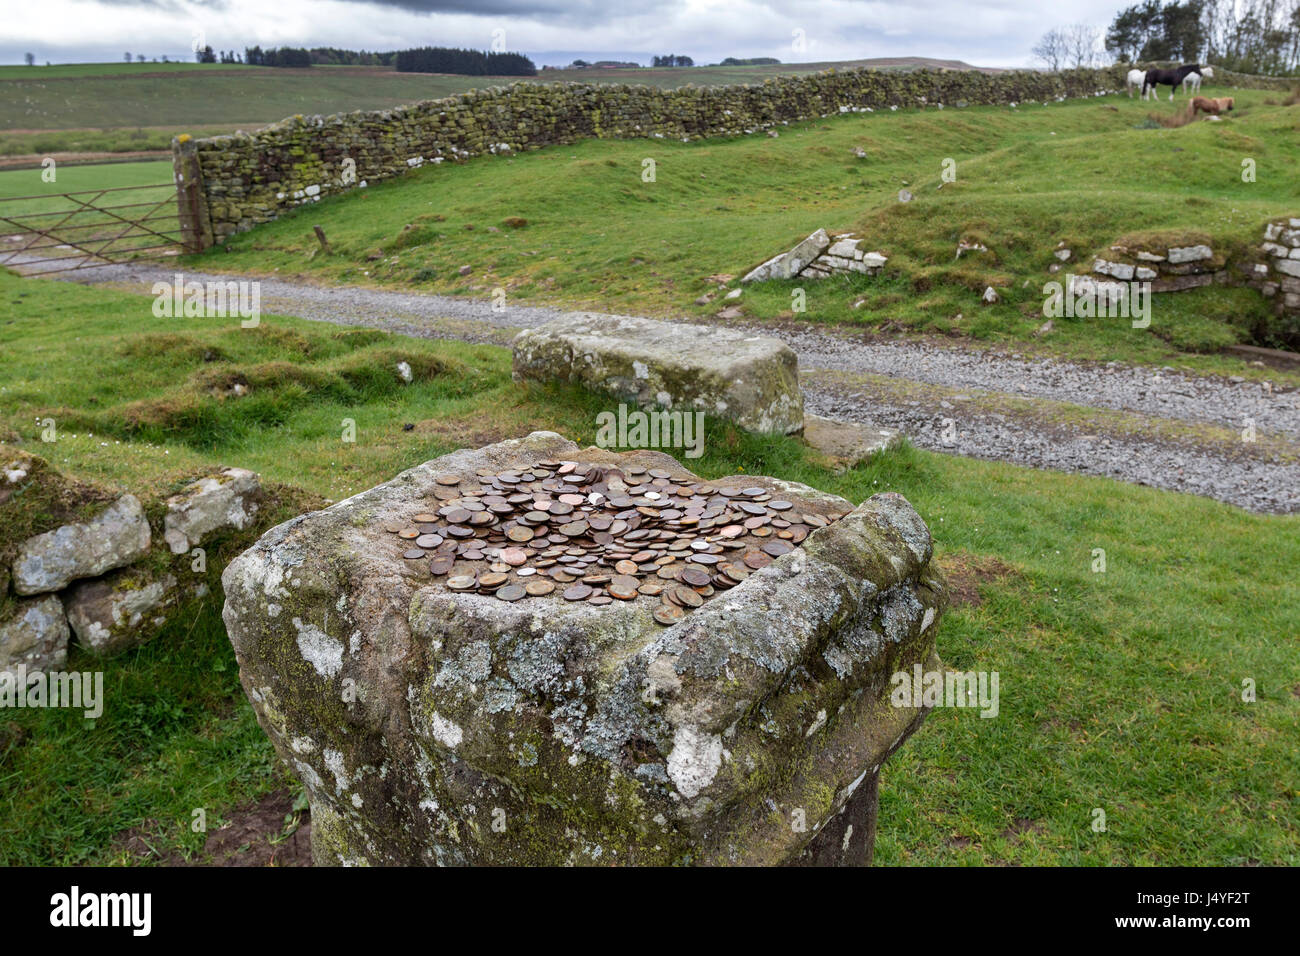 Altar Stone with Modern Day Votive Offerings, Aesica Roman Fort (Great Chesters) Hadrian's Wall, Haltwhistle, Northumberland, UK Stock Photo